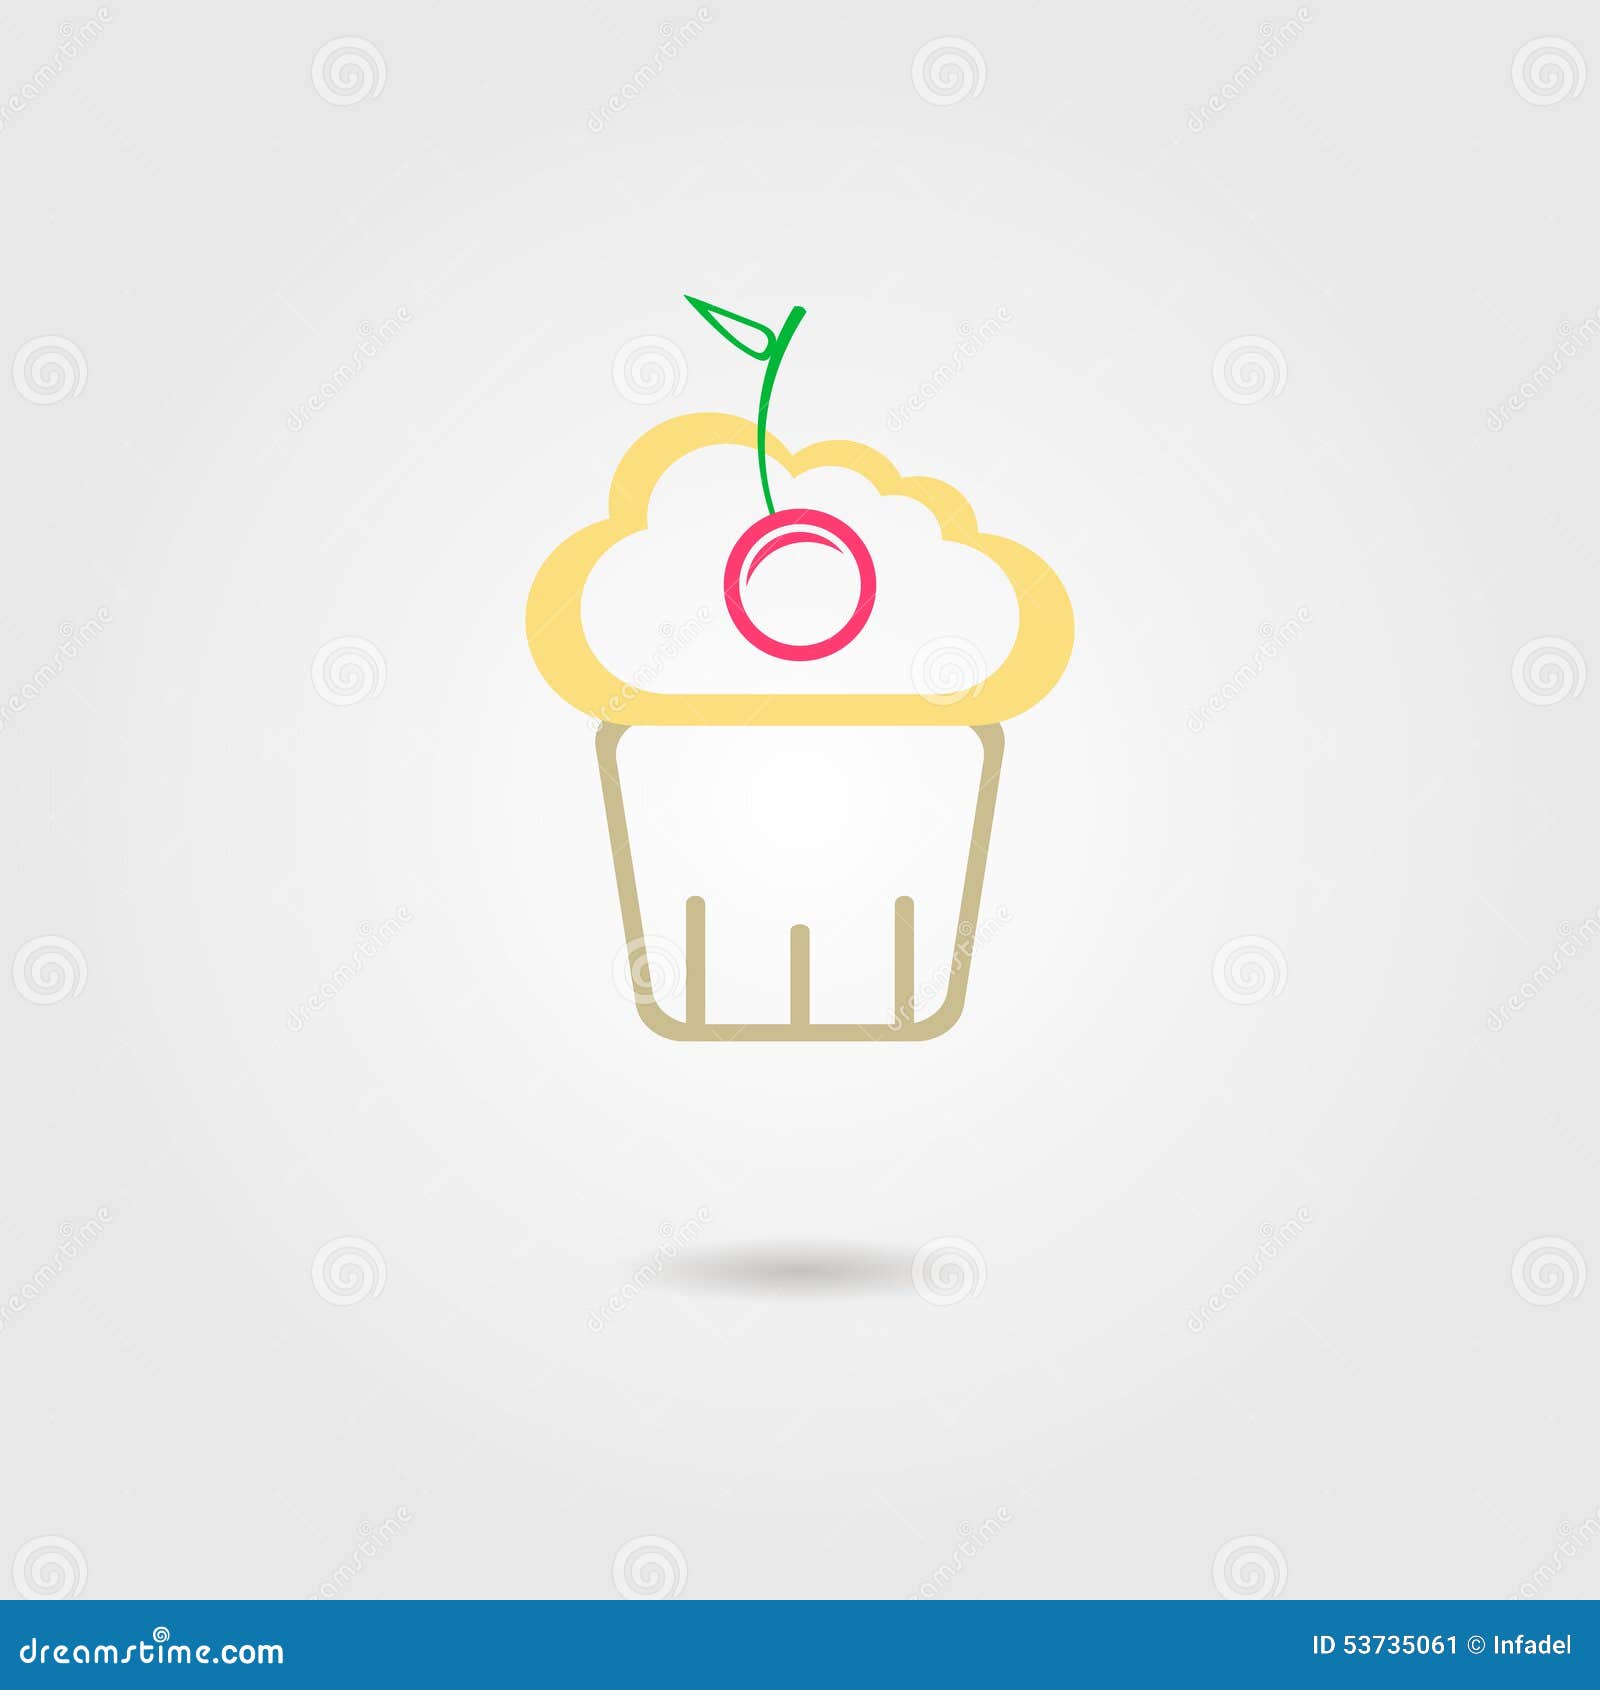 Cake with cherry stock vector. Illustration of bakery - 53735061